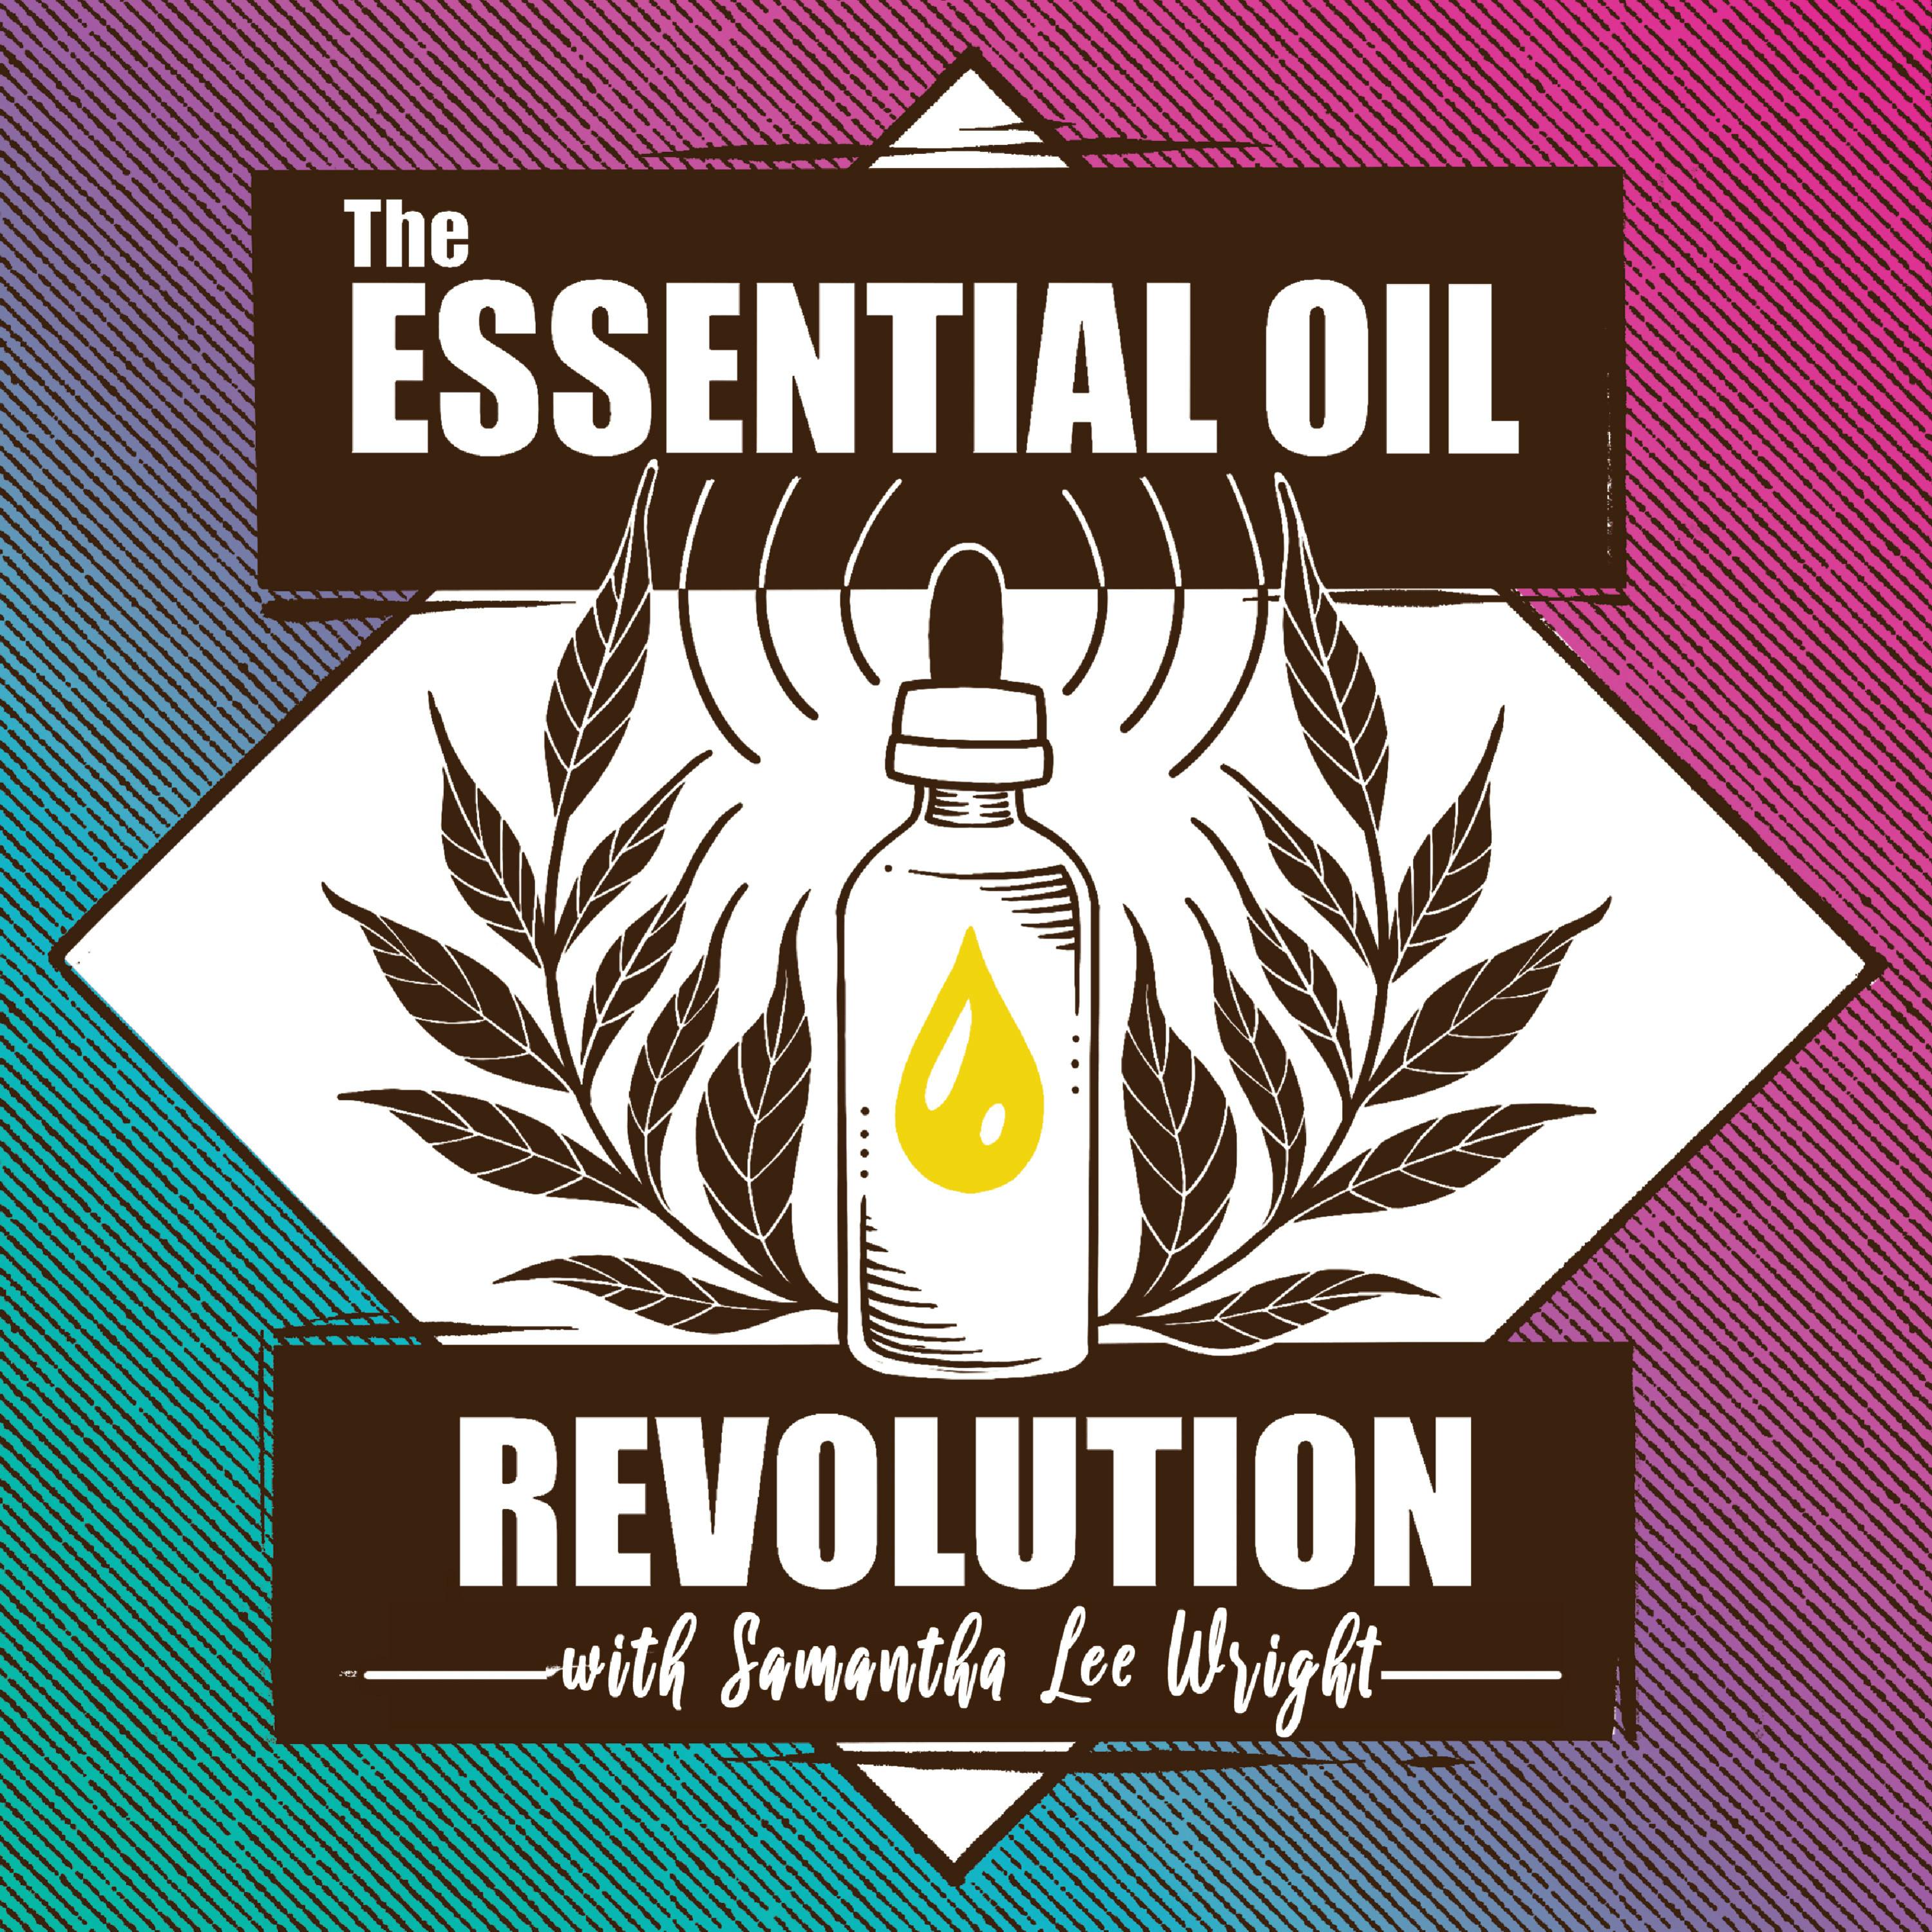 308: Protect the Microbiome of Your Mouth w/ Essential Oils w/ Caroline Duggan, CBO of Lumineux